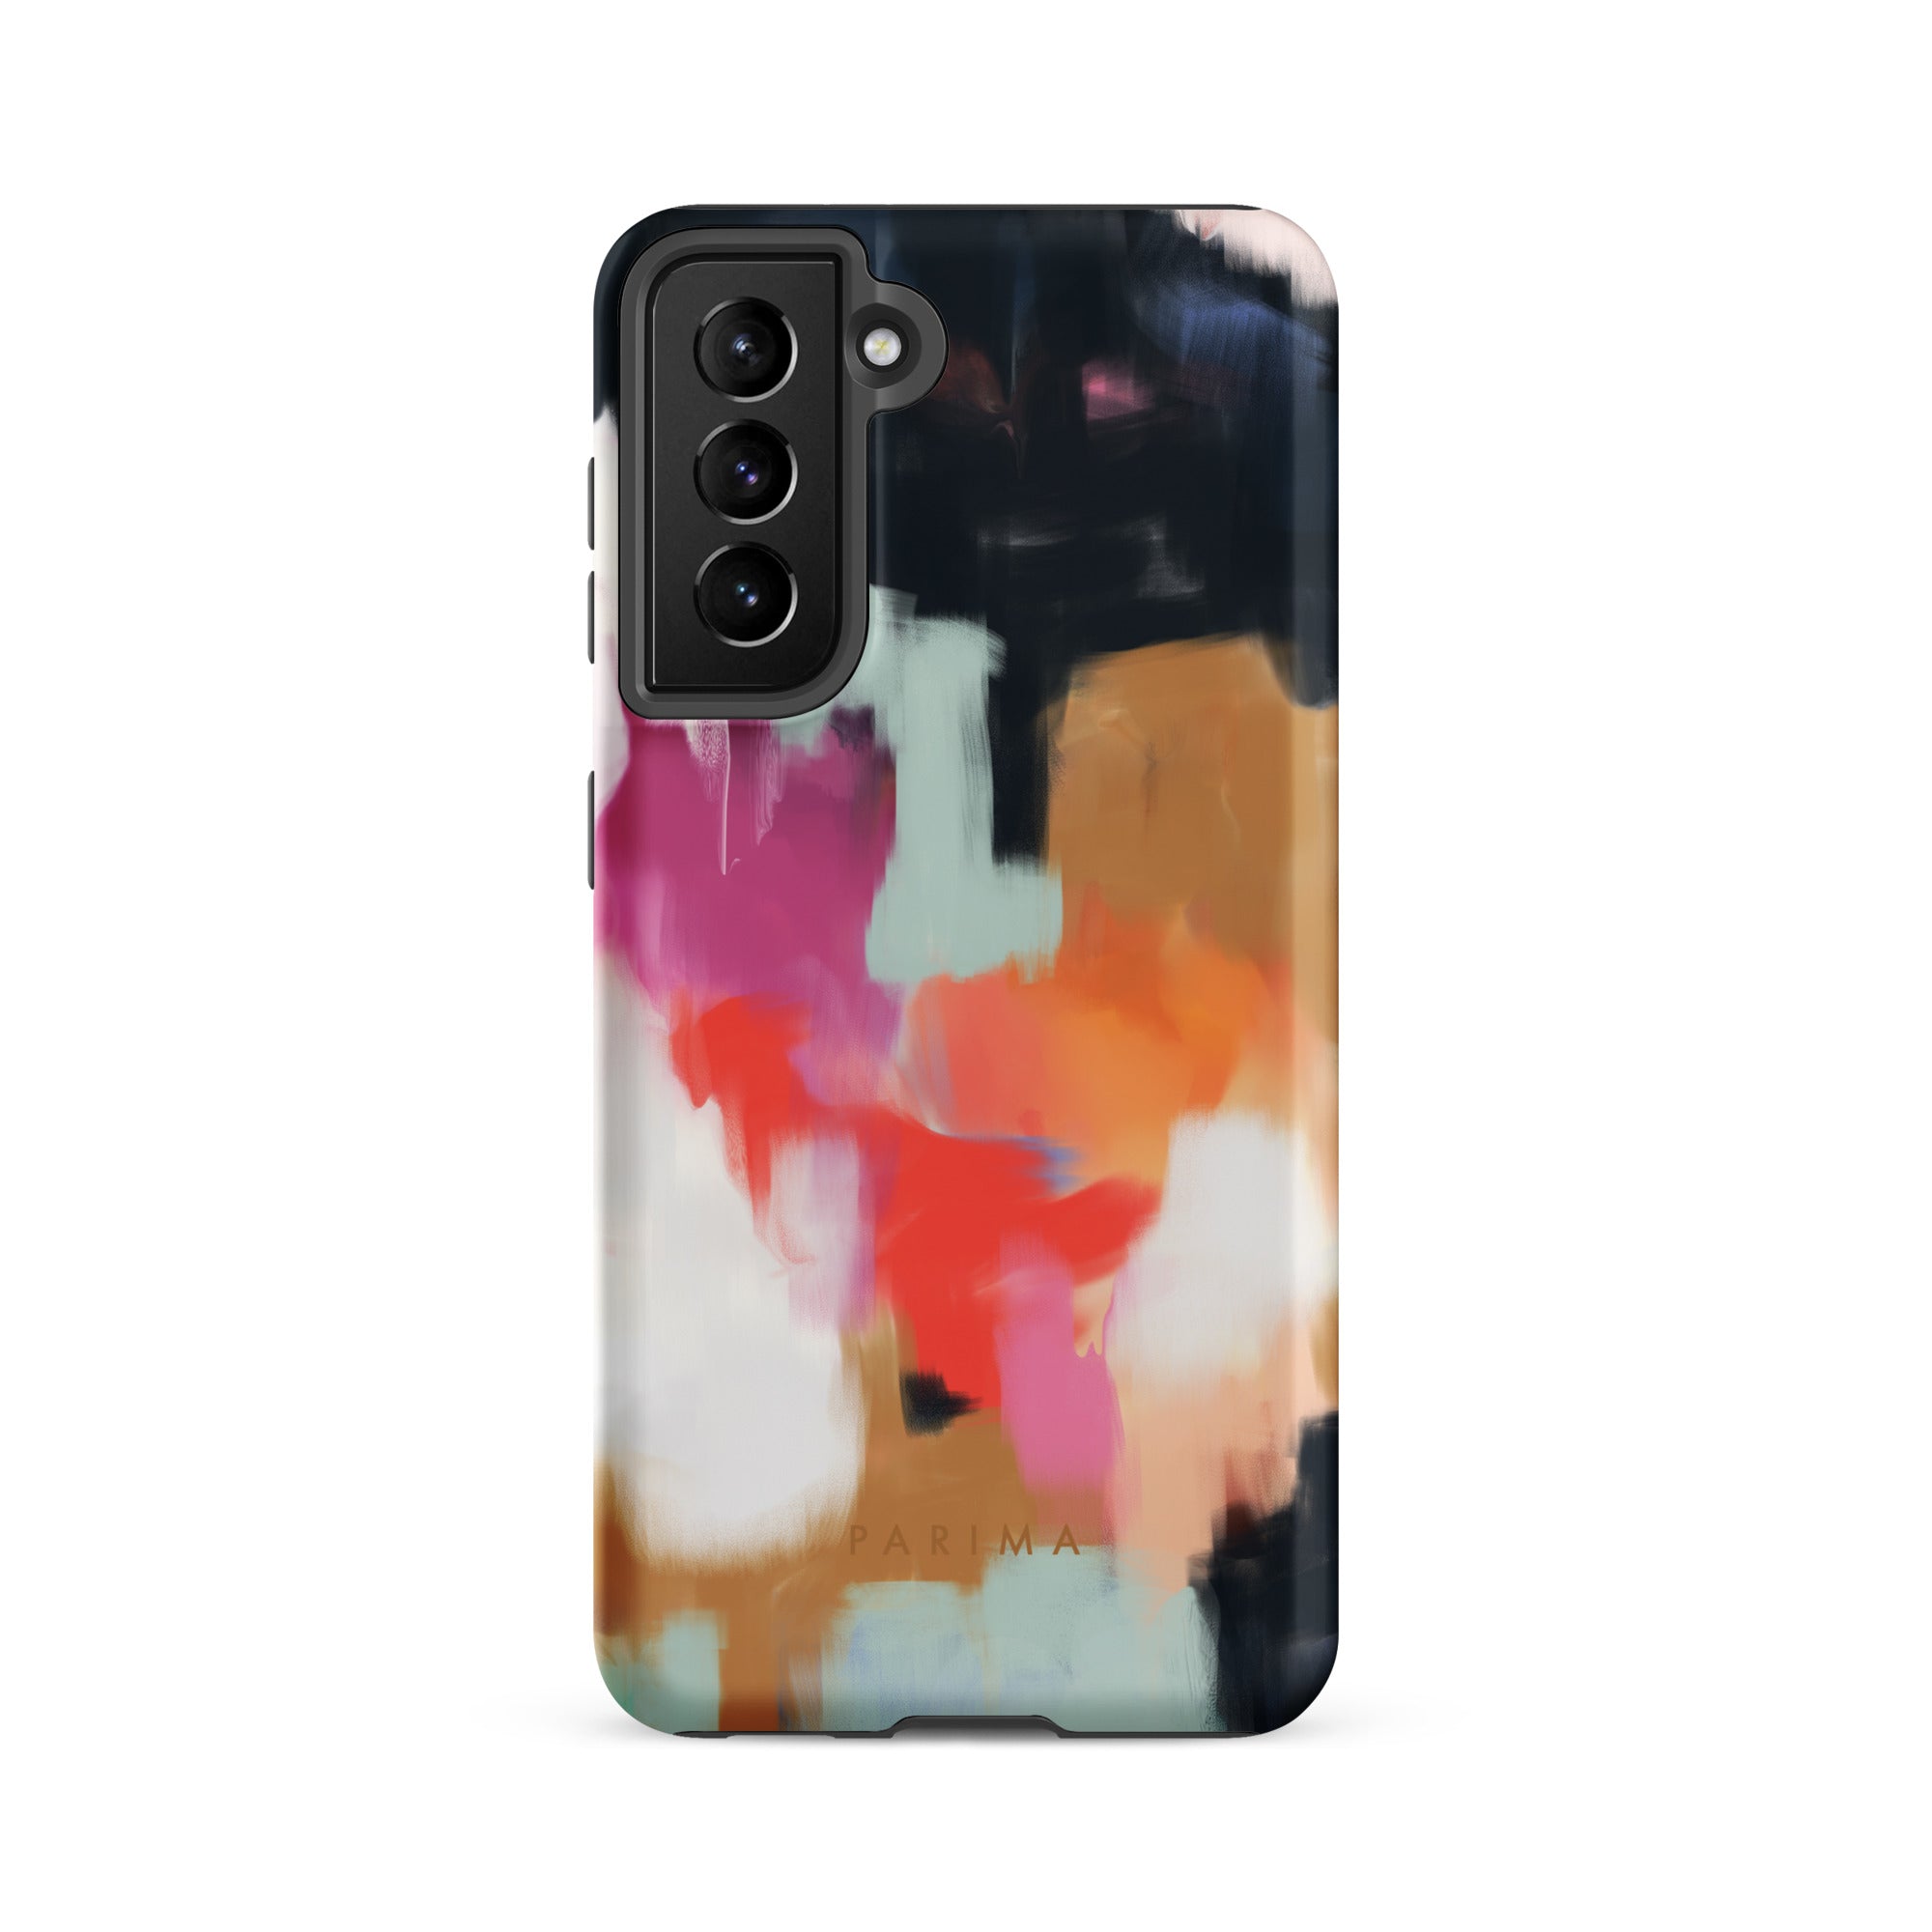 Ruthie, blue and pink abstract art on Samsung Galaxy S21 FE tough case by Parima Studio